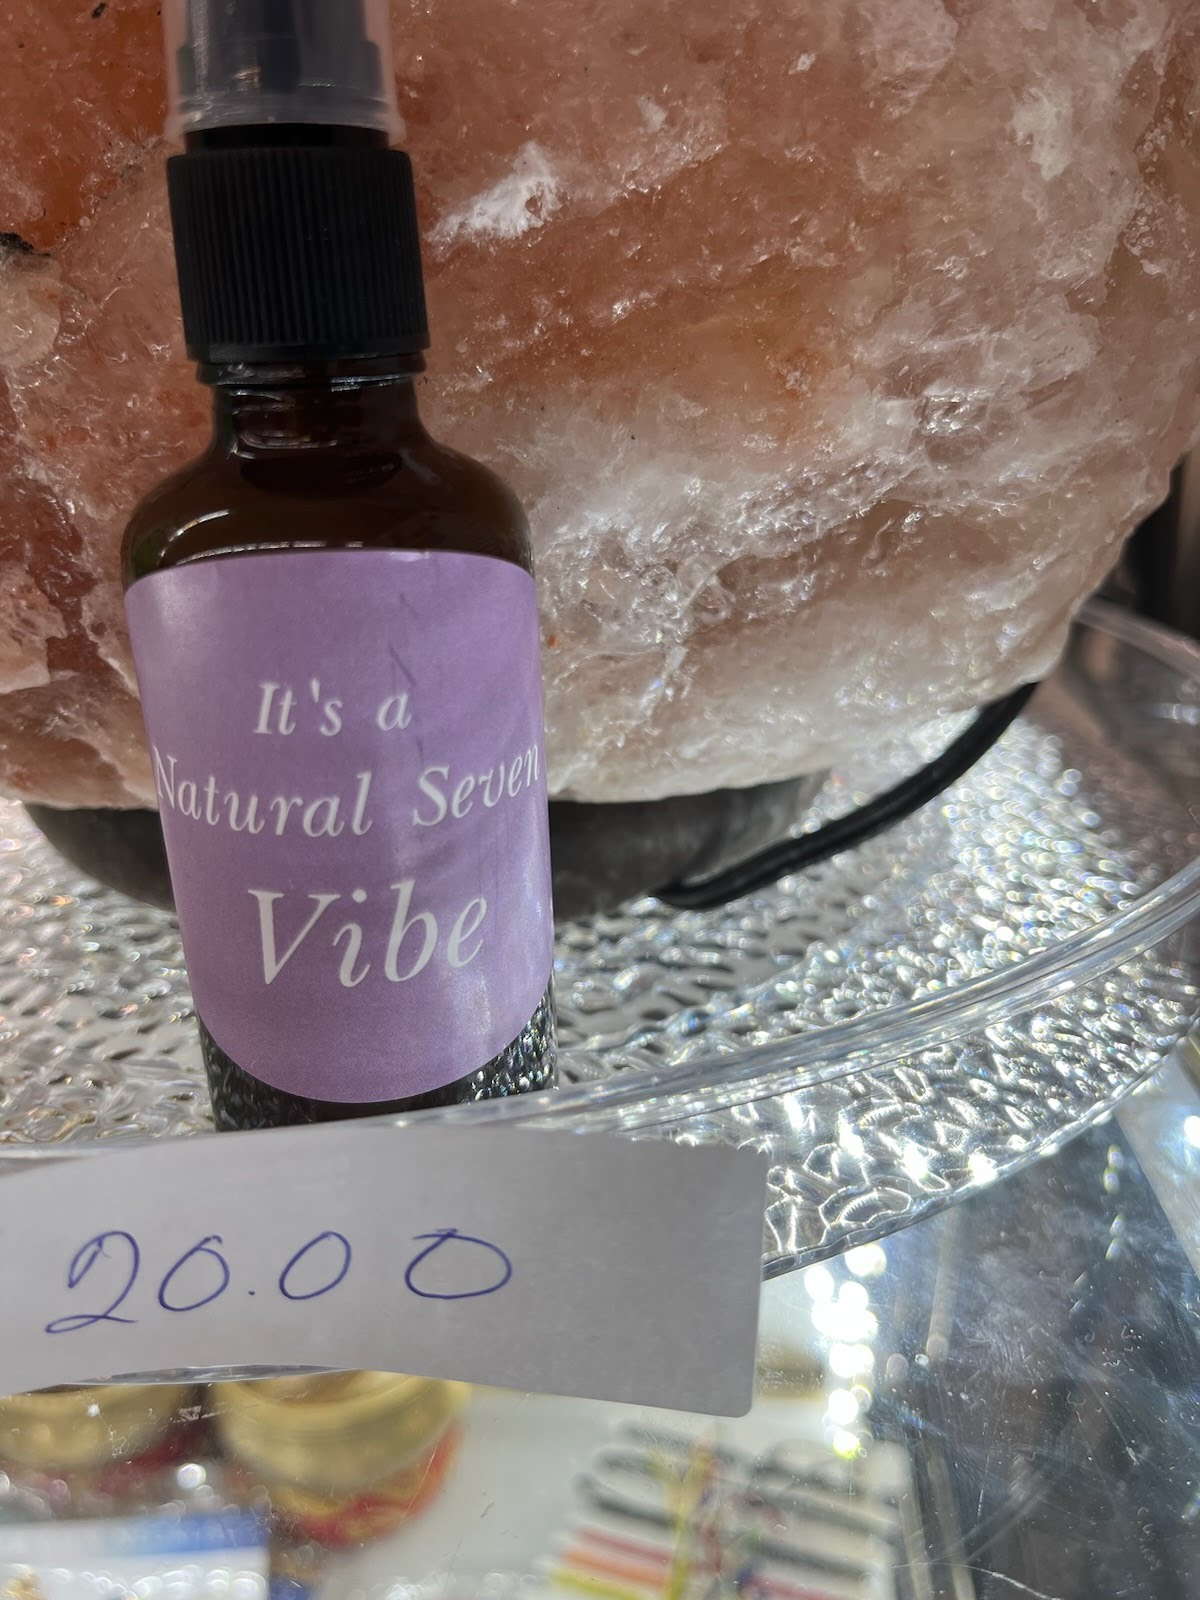 A bottle of lavender oil sitting next to a rock.